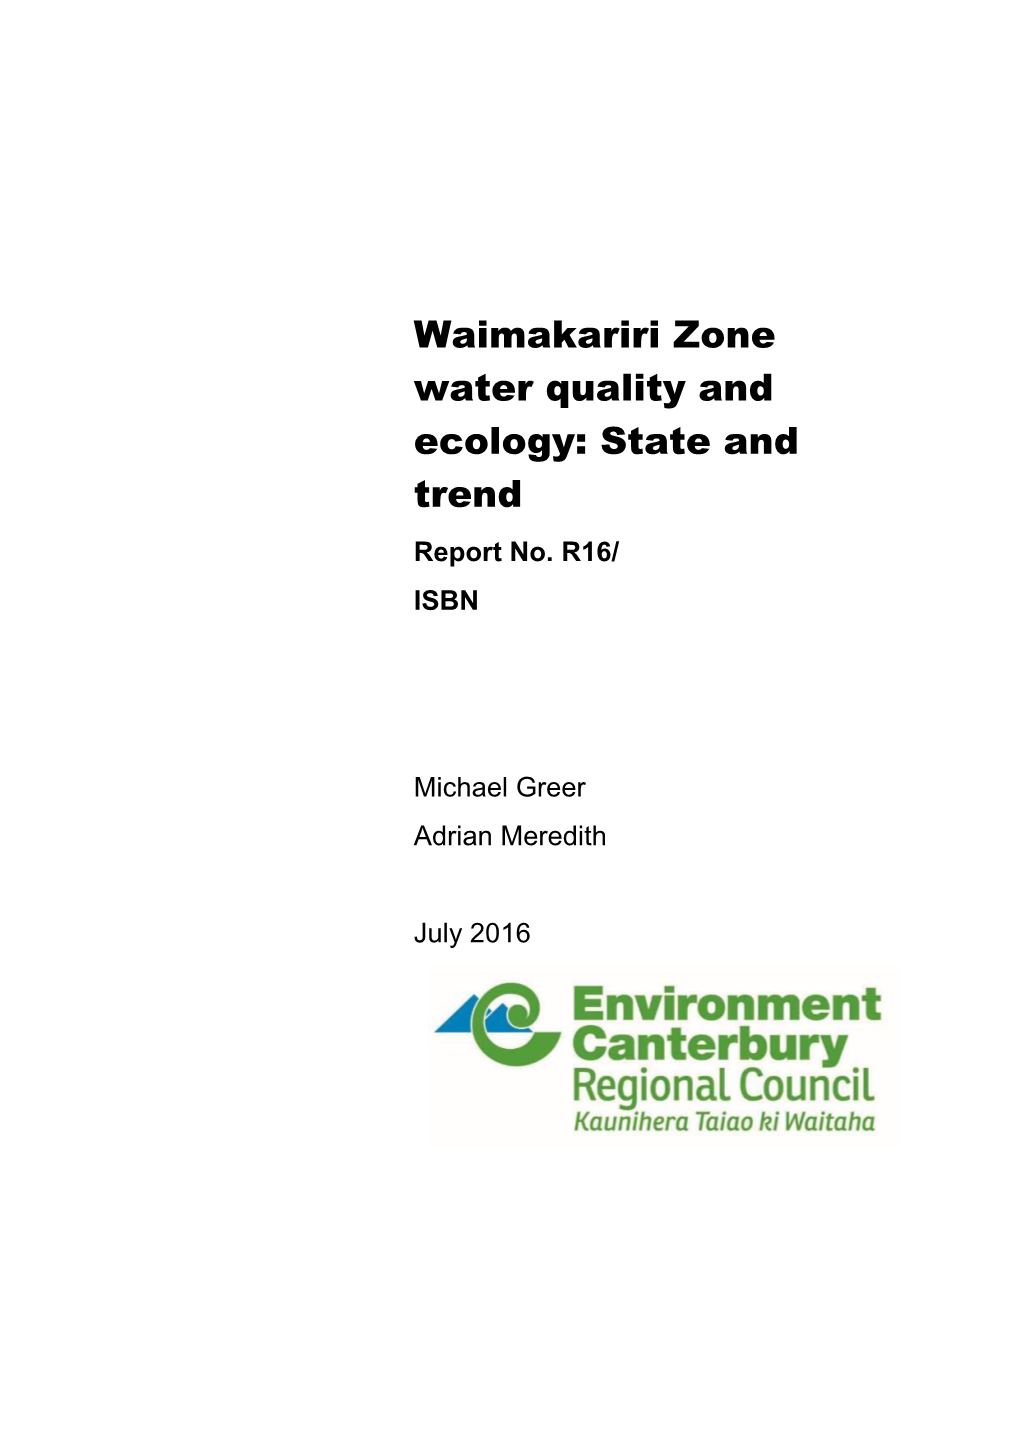 Waimakariri Zone Water Quality and Ecology: State and Trend Report No